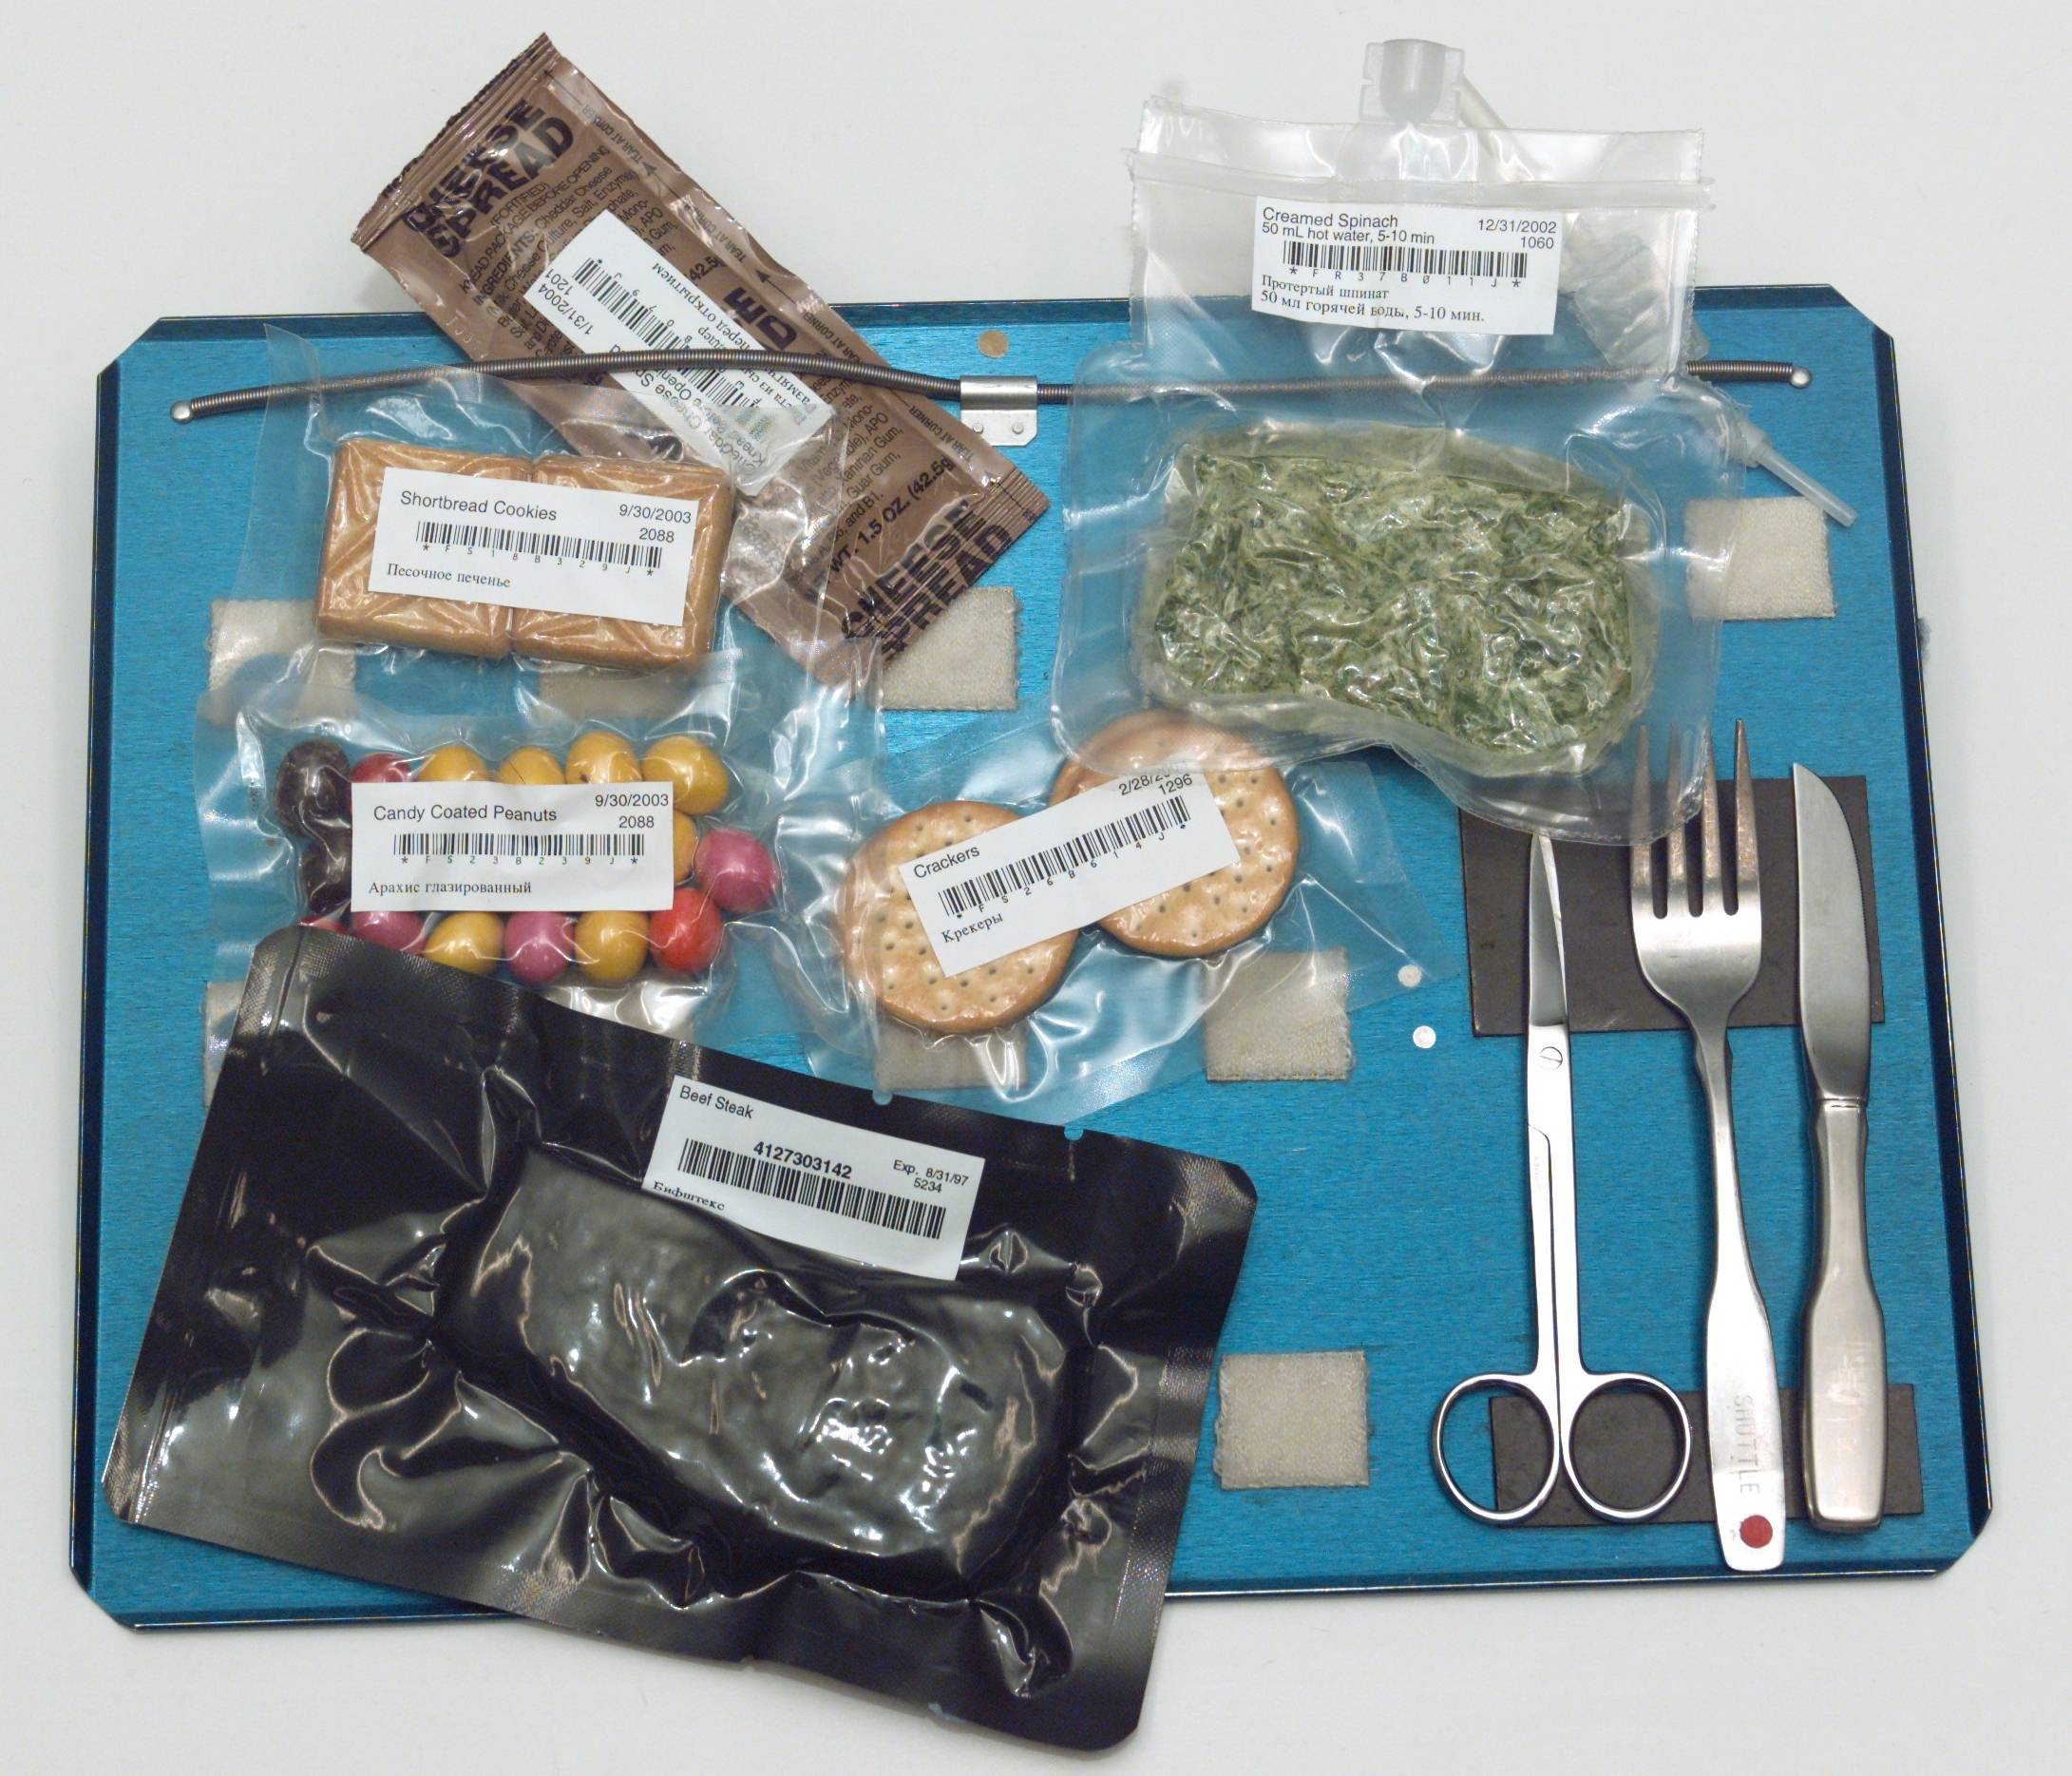 Food tray aboard the Space Shuttle. Note the use of magnets, springs, and Velcro to hold the cutlery and food in place.